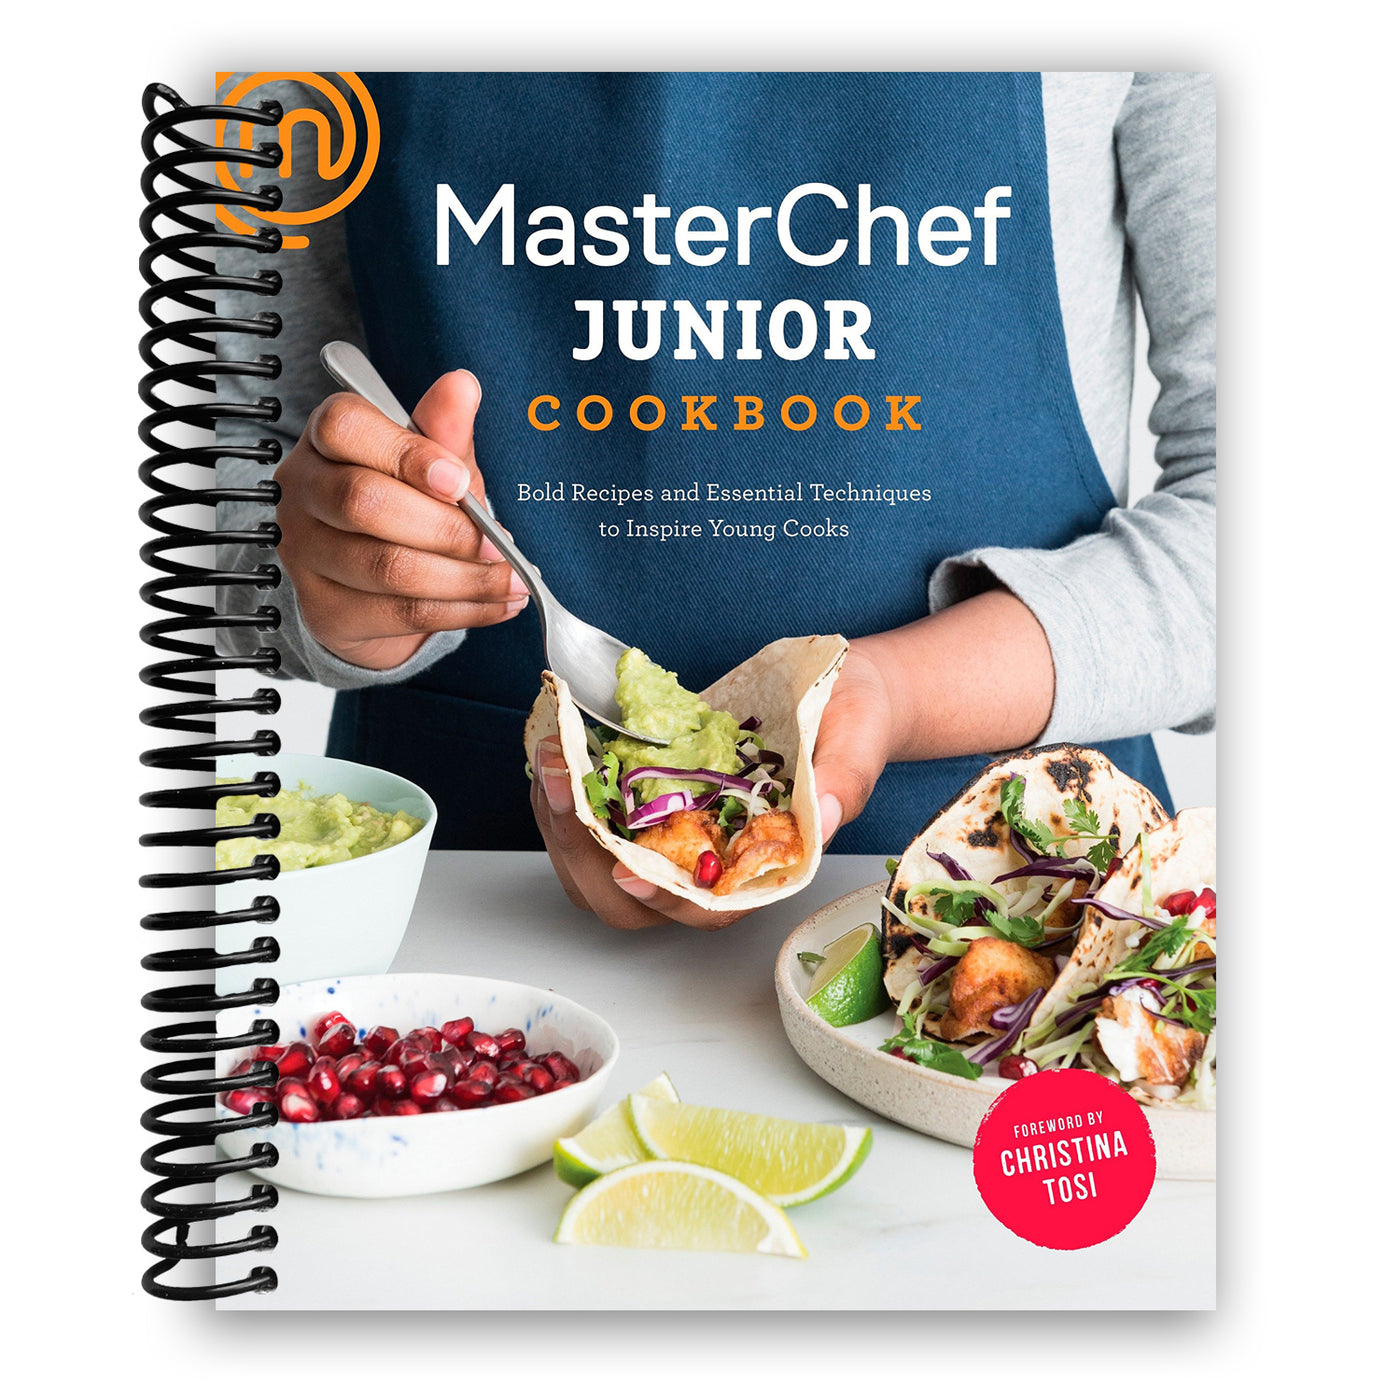 MasterChef Junior Cookbook: Bold Recipes and Essential Techniques to Inspire Young Cooks (Spiral Bound)